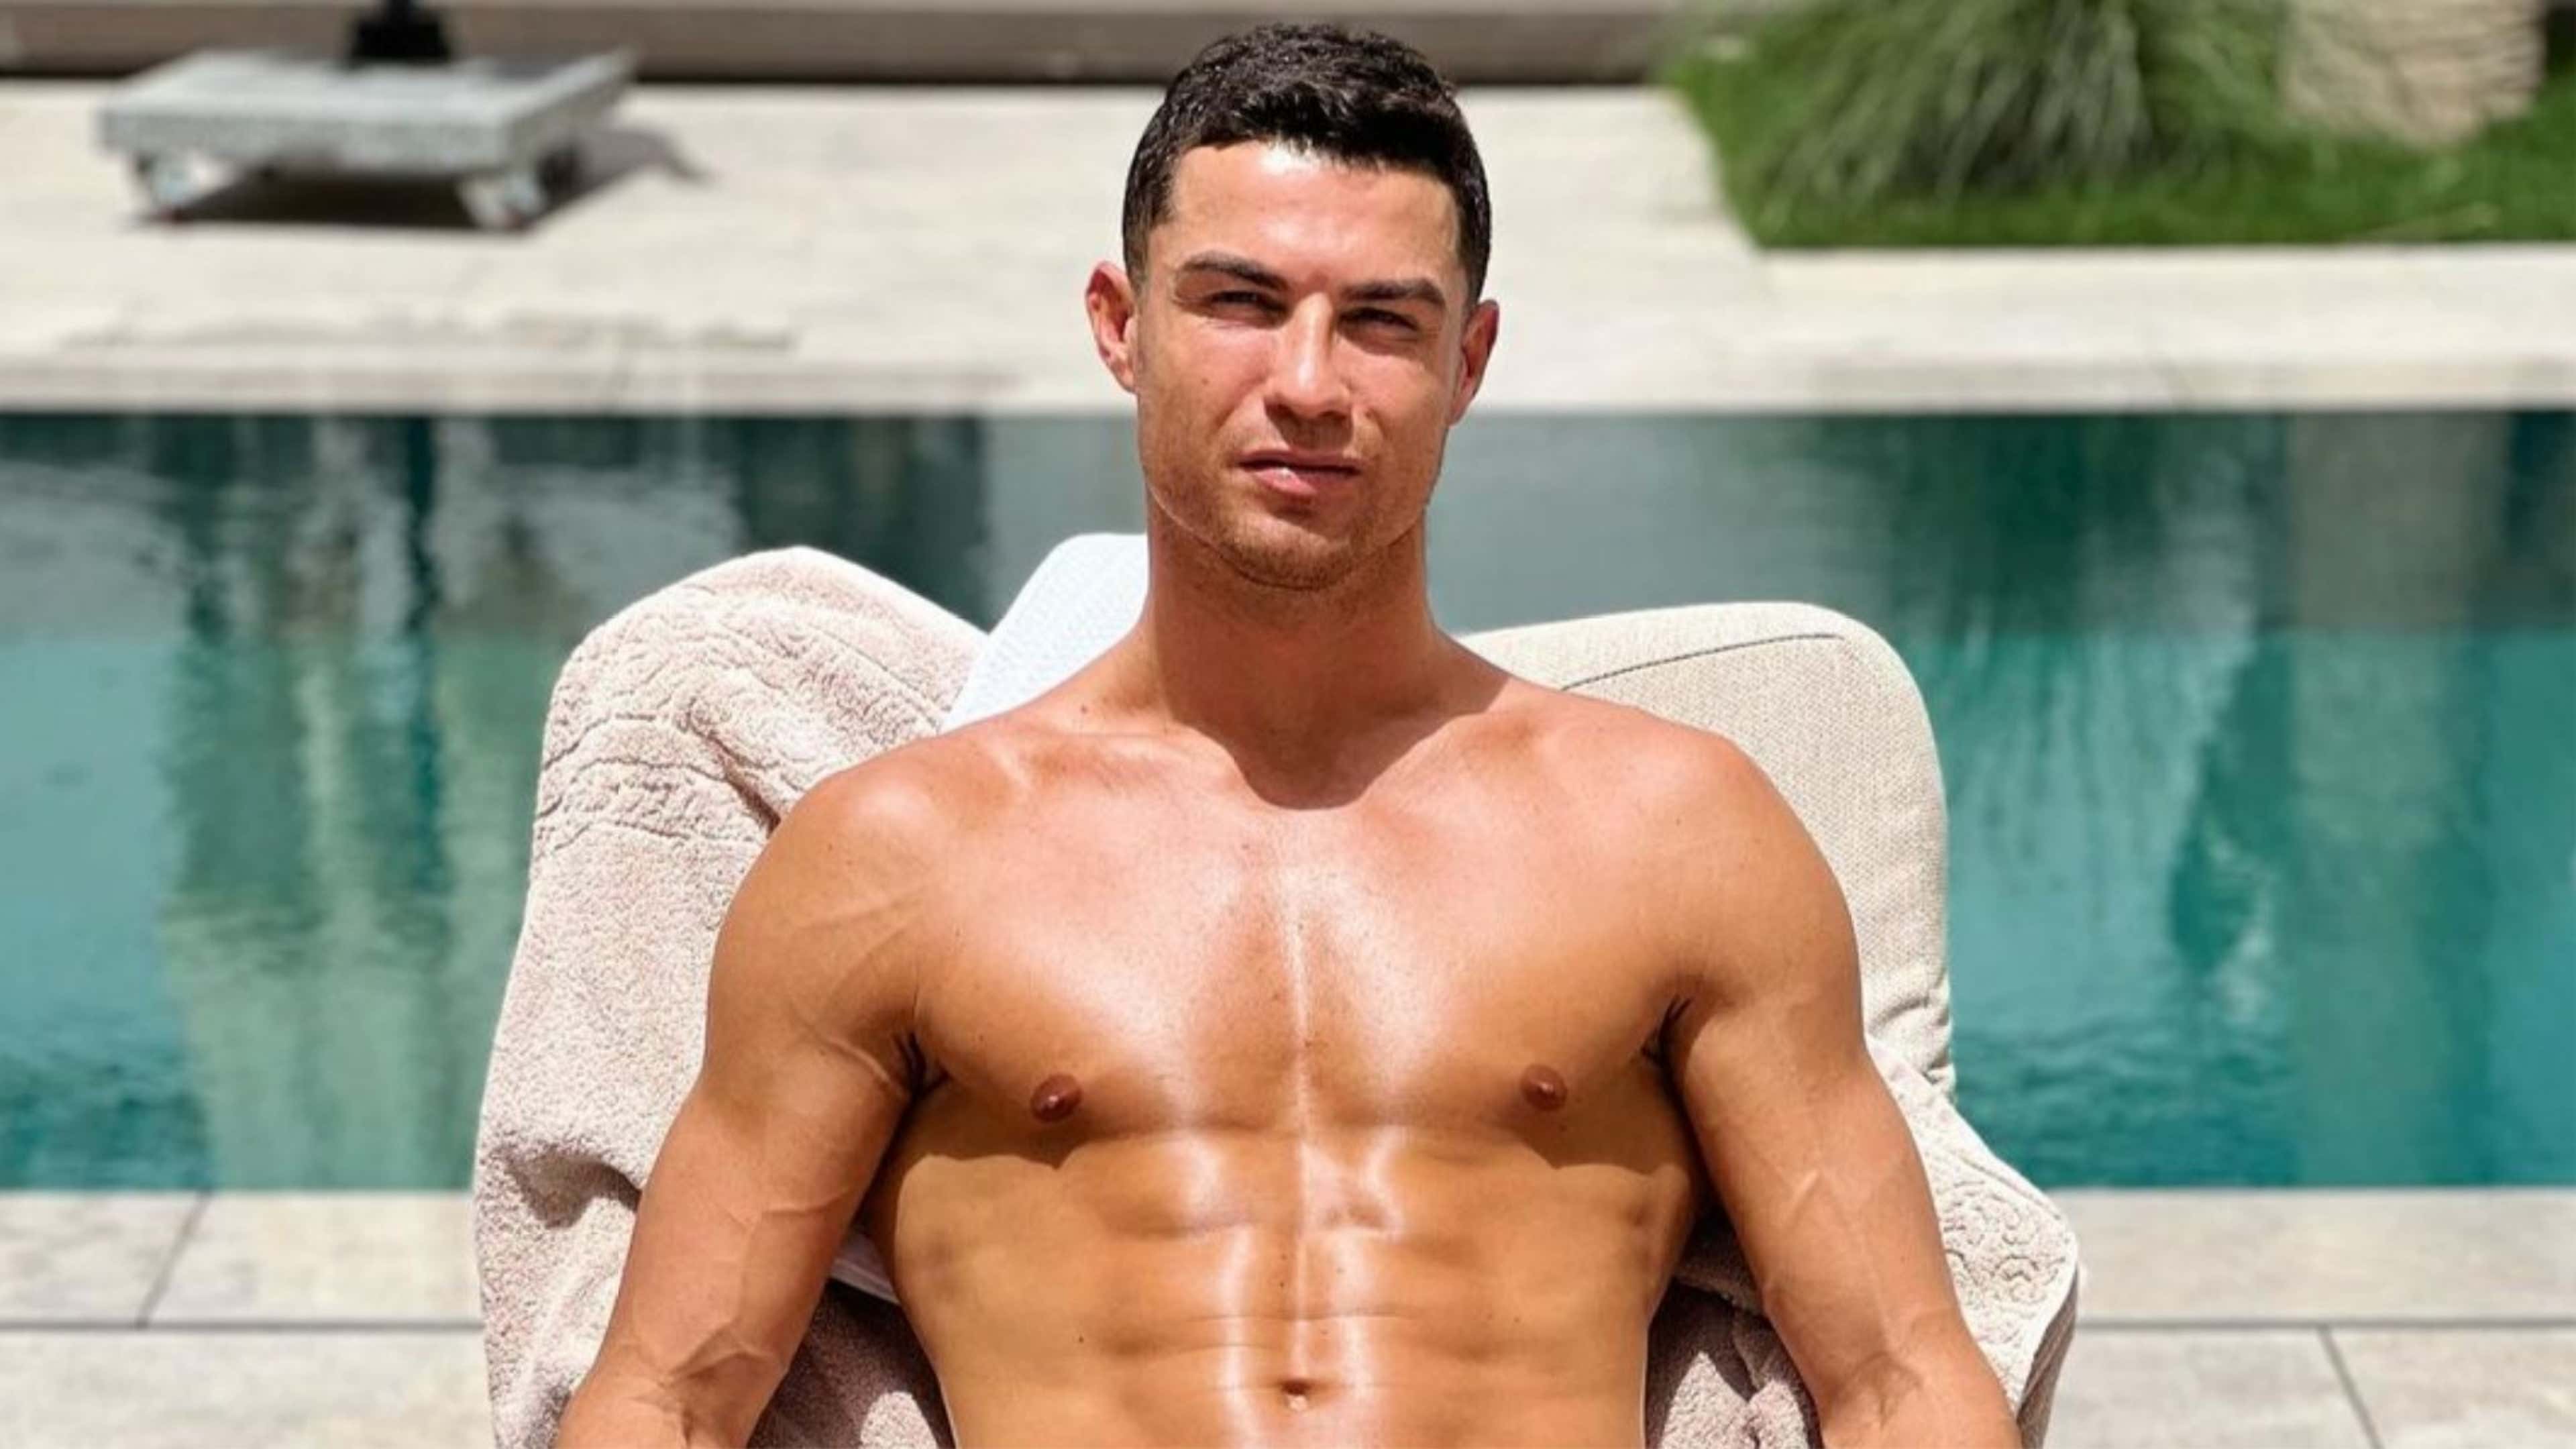 Cristiano Ronaldo races to 4m likes in two hours with latest